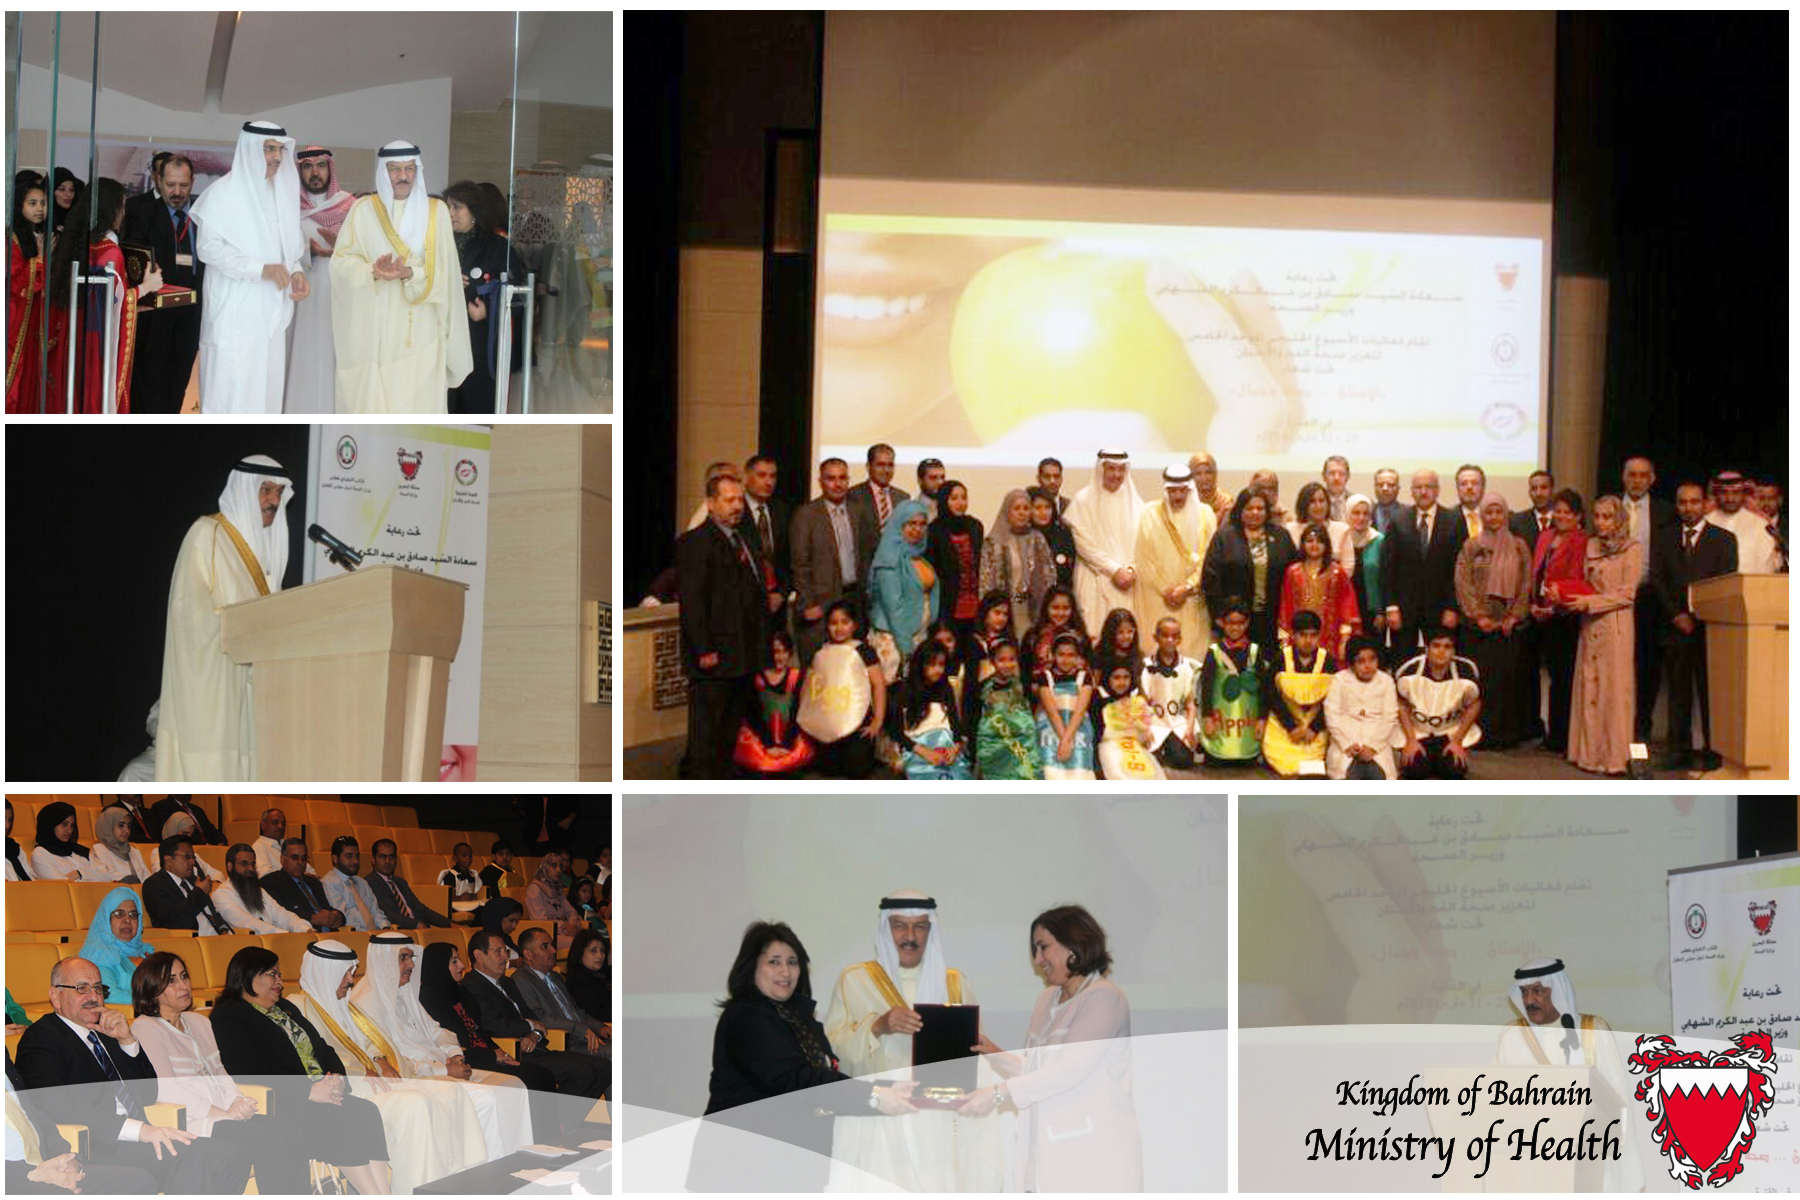 The events and activities aim to promote the cultural awareness of mouth and teeth health in the society - Minister of health opens the inauguration ceremony of the events of the Gulf unified week of improving mouth and teeth health